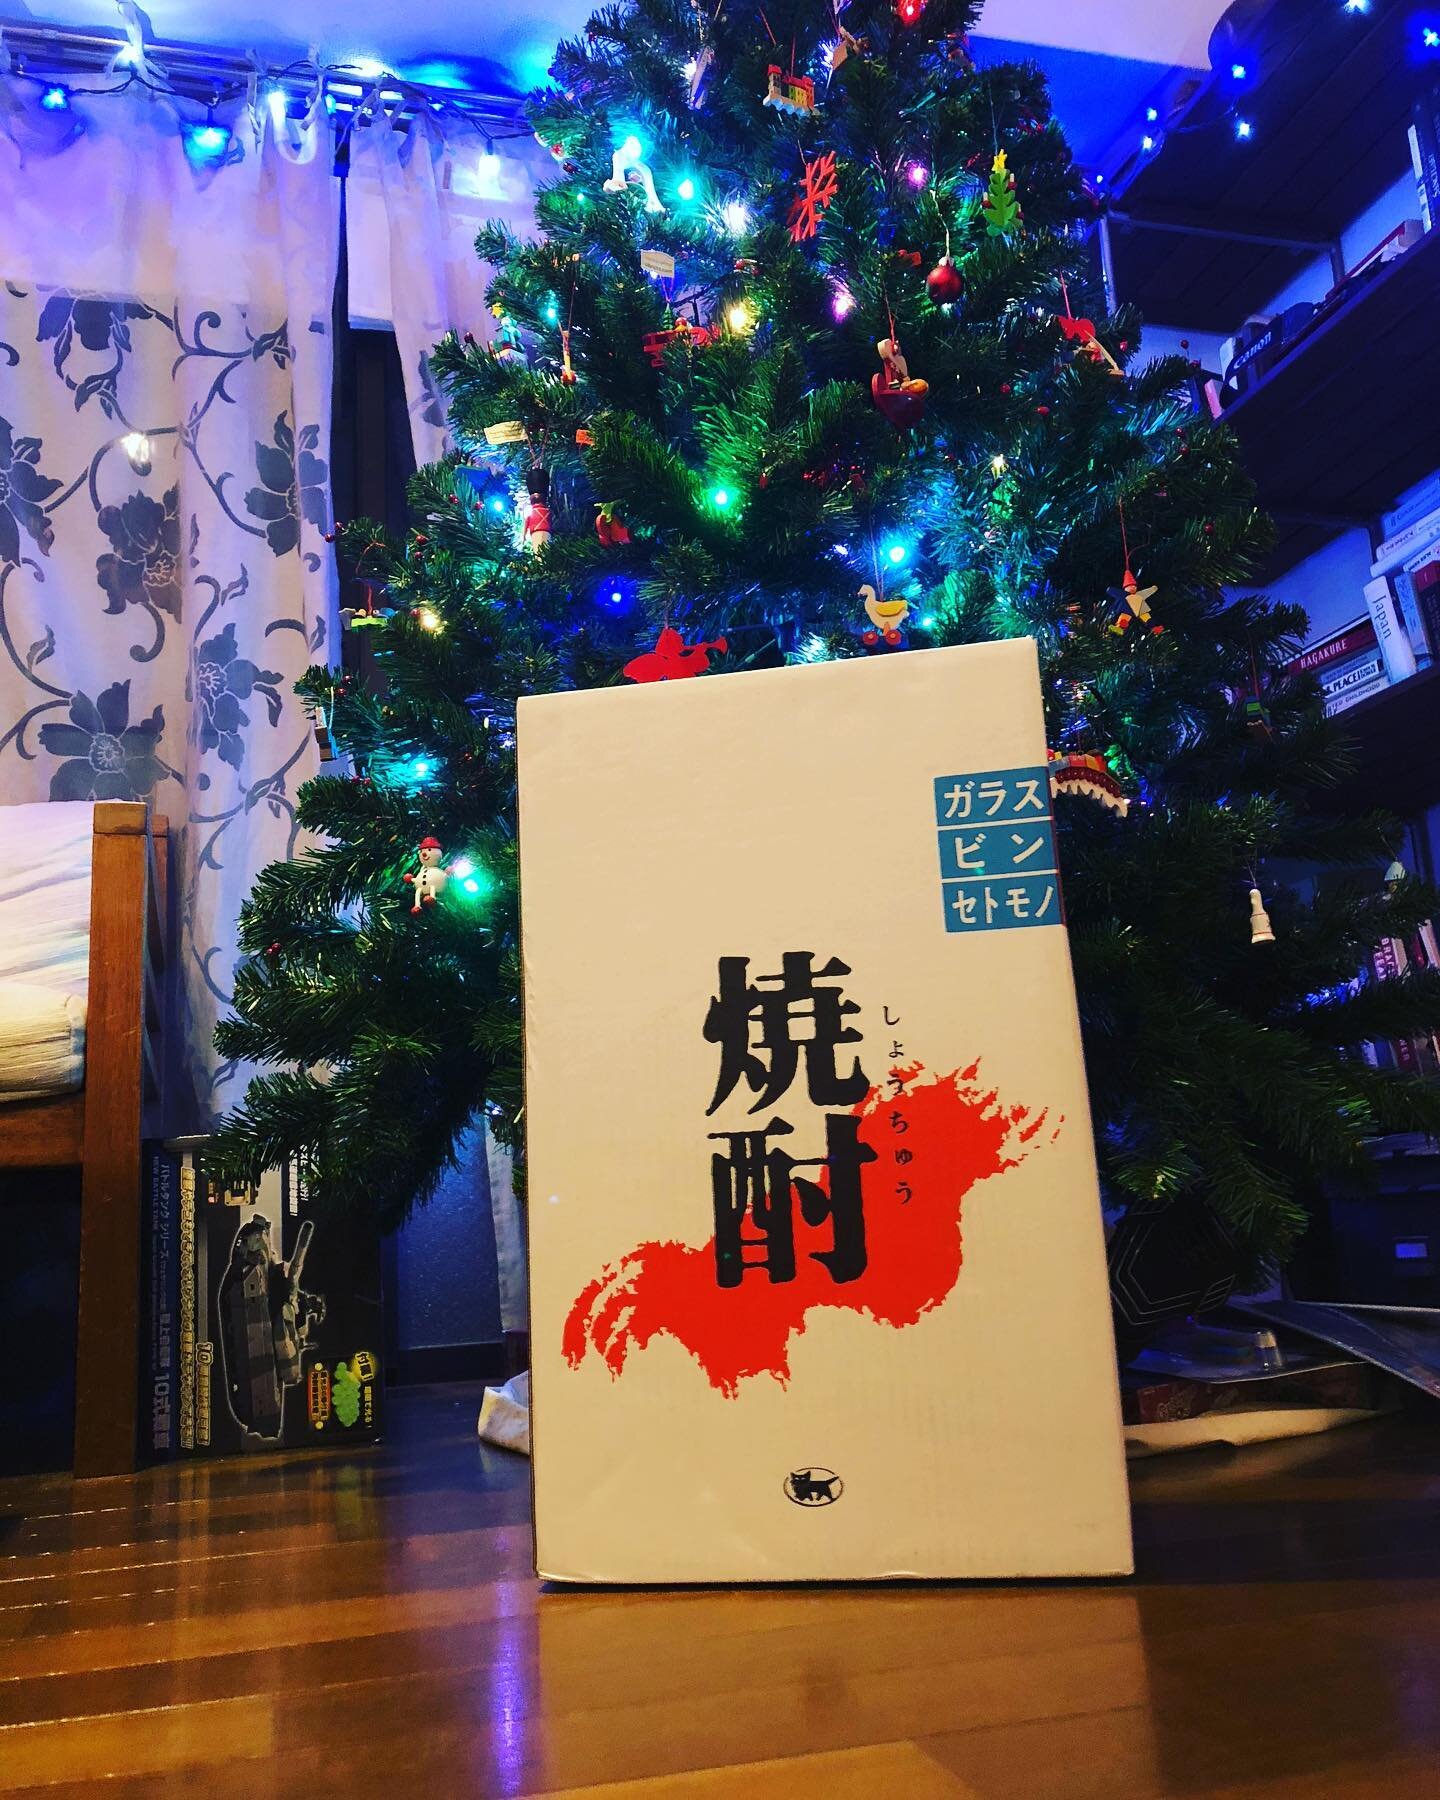 Santa arrived early and just in time for Labor Thanksgiving Day 🇯🇵 

Two bottles of imo shōchū&mdash;one is a favorite, the other an interesting find I happened across during a short visit last summer to the Koshiki archipelago off the western coas